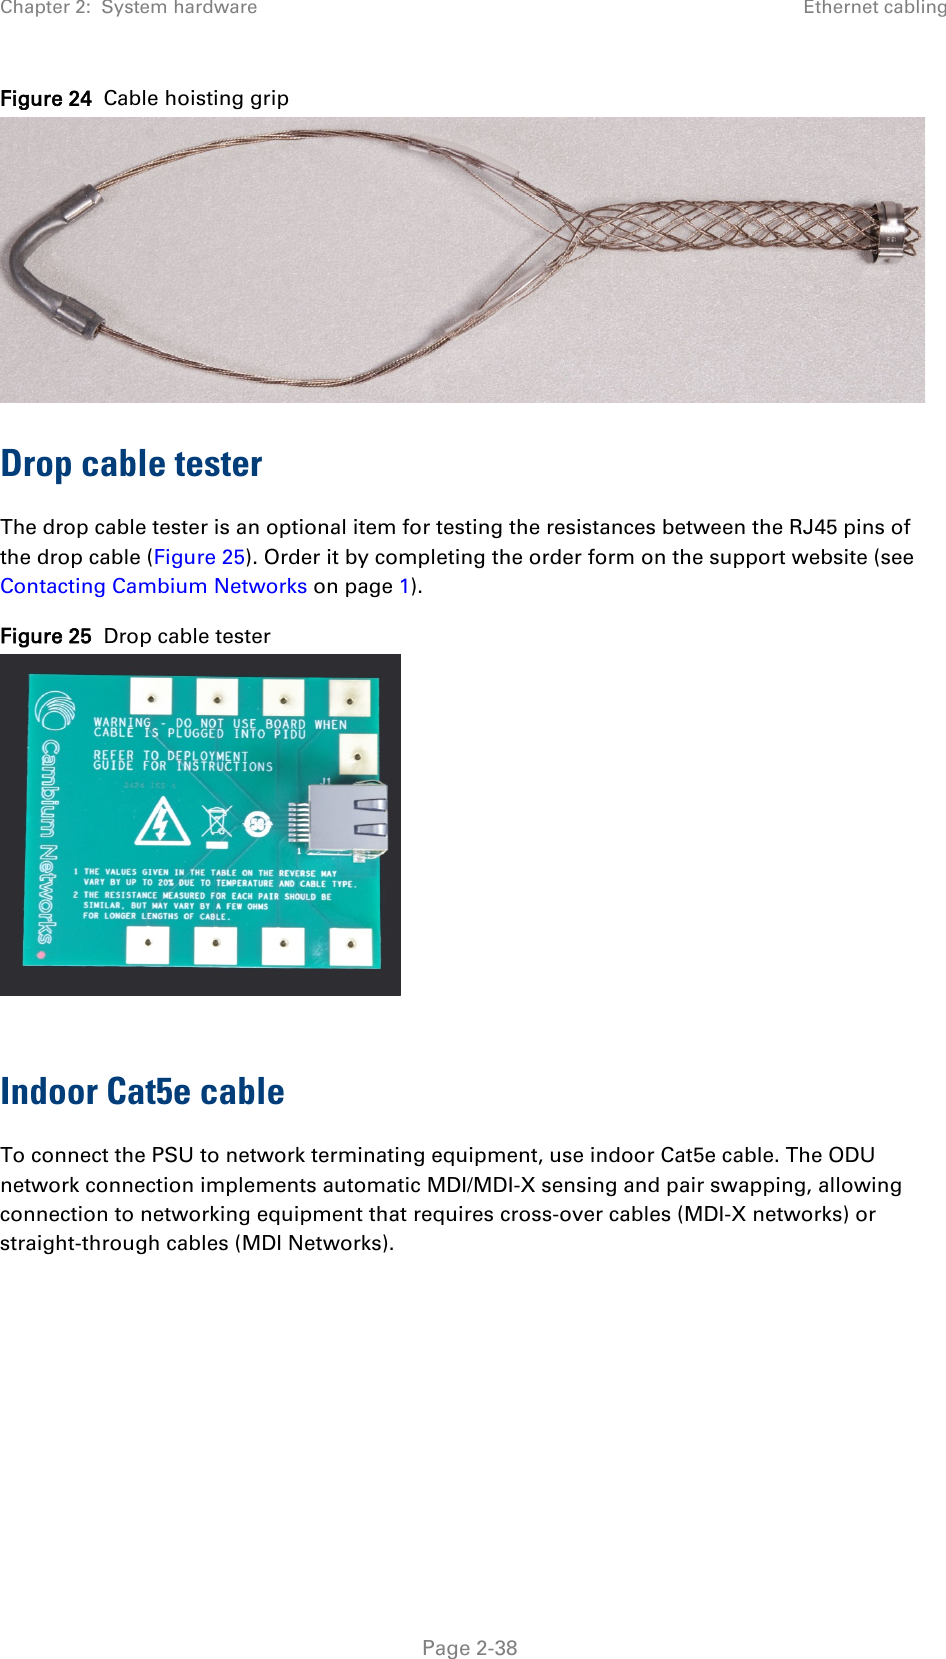 Chapter 2:  System hardware Ethernet cabling  Figure 24  Cable hoisting grip  Drop cable tester The drop cable tester is an optional item for testing the resistances between the RJ45 pins of the drop cable (Figure 25). Order it by completing the order form on the support website (see Contacting Cambium Networks on page 1). Figure 25  Drop cable tester   Indoor Cat5e cable To connect the PSU to network terminating equipment, use indoor Cat5e cable. The ODU network connection implements automatic MDI/MDI-X sensing and pair swapping, allowing connection to networking equipment that requires cross-over cables (MDI-X networks) or straight-through cables (MDI Networks).  Page 2-38 